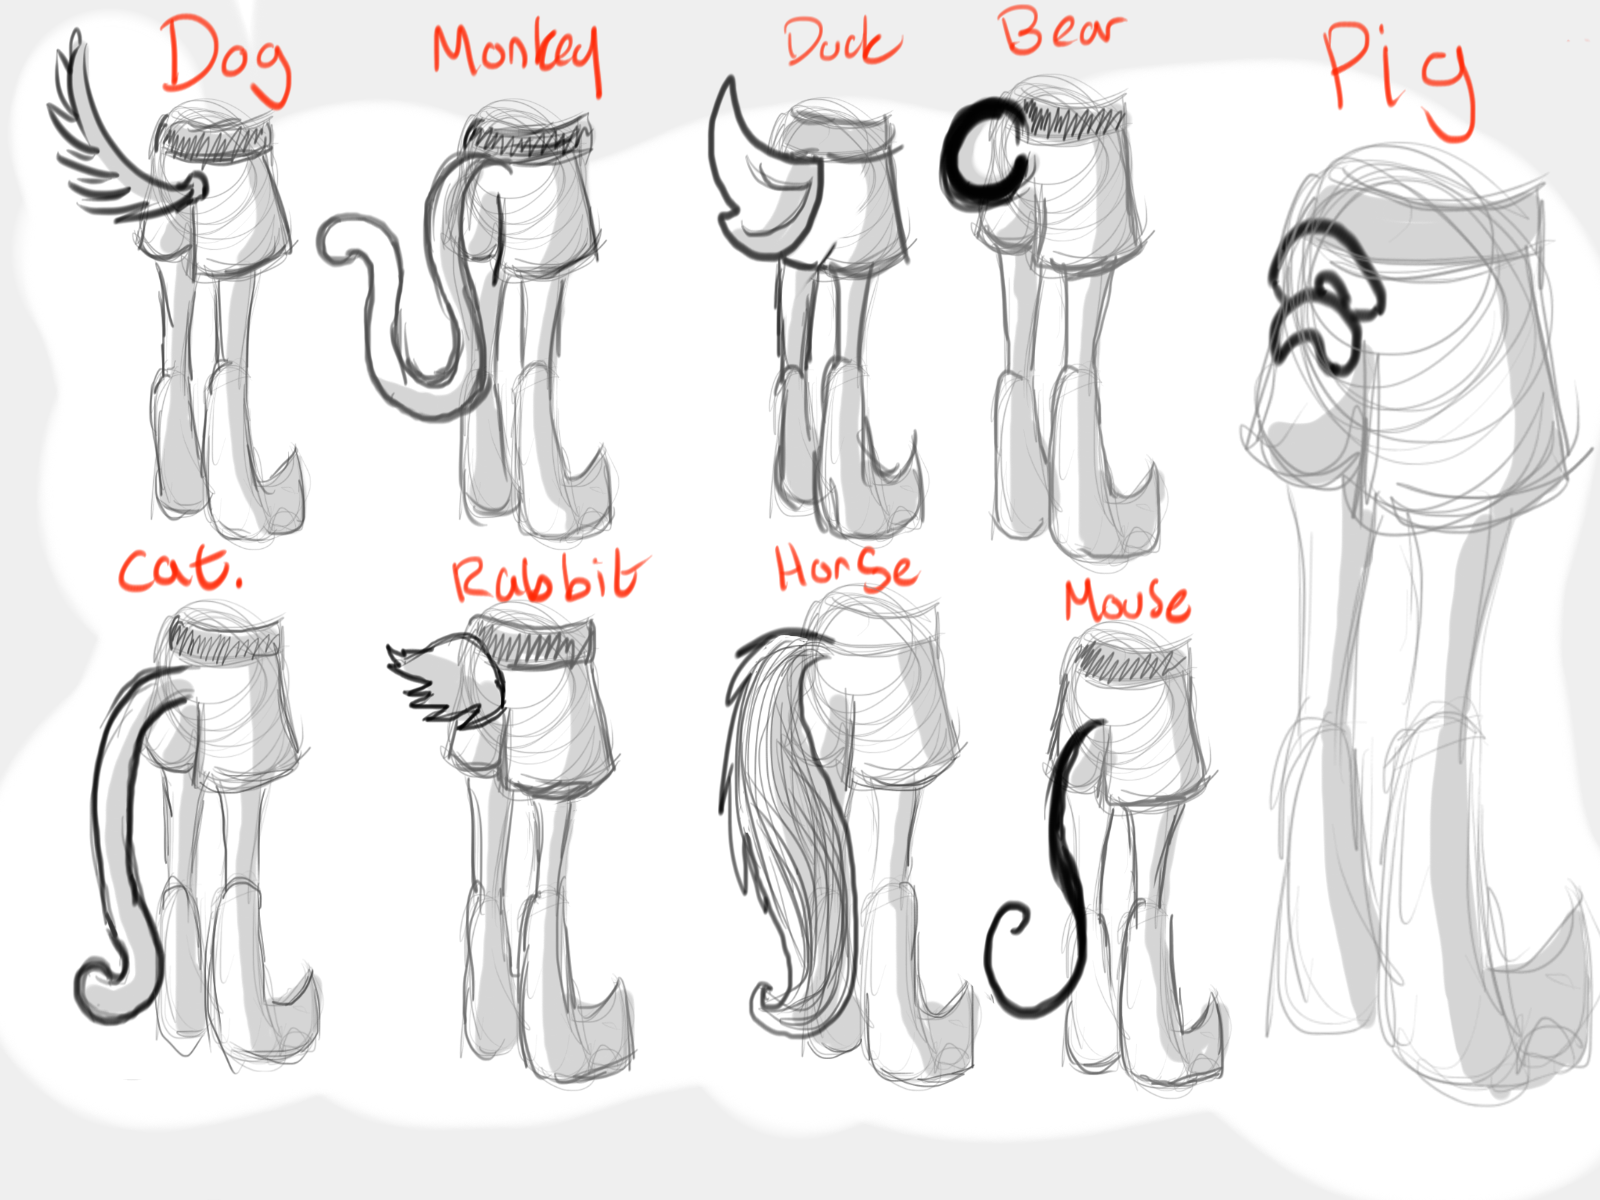 Toontown Tails. by swaggerpede on DeviantArt